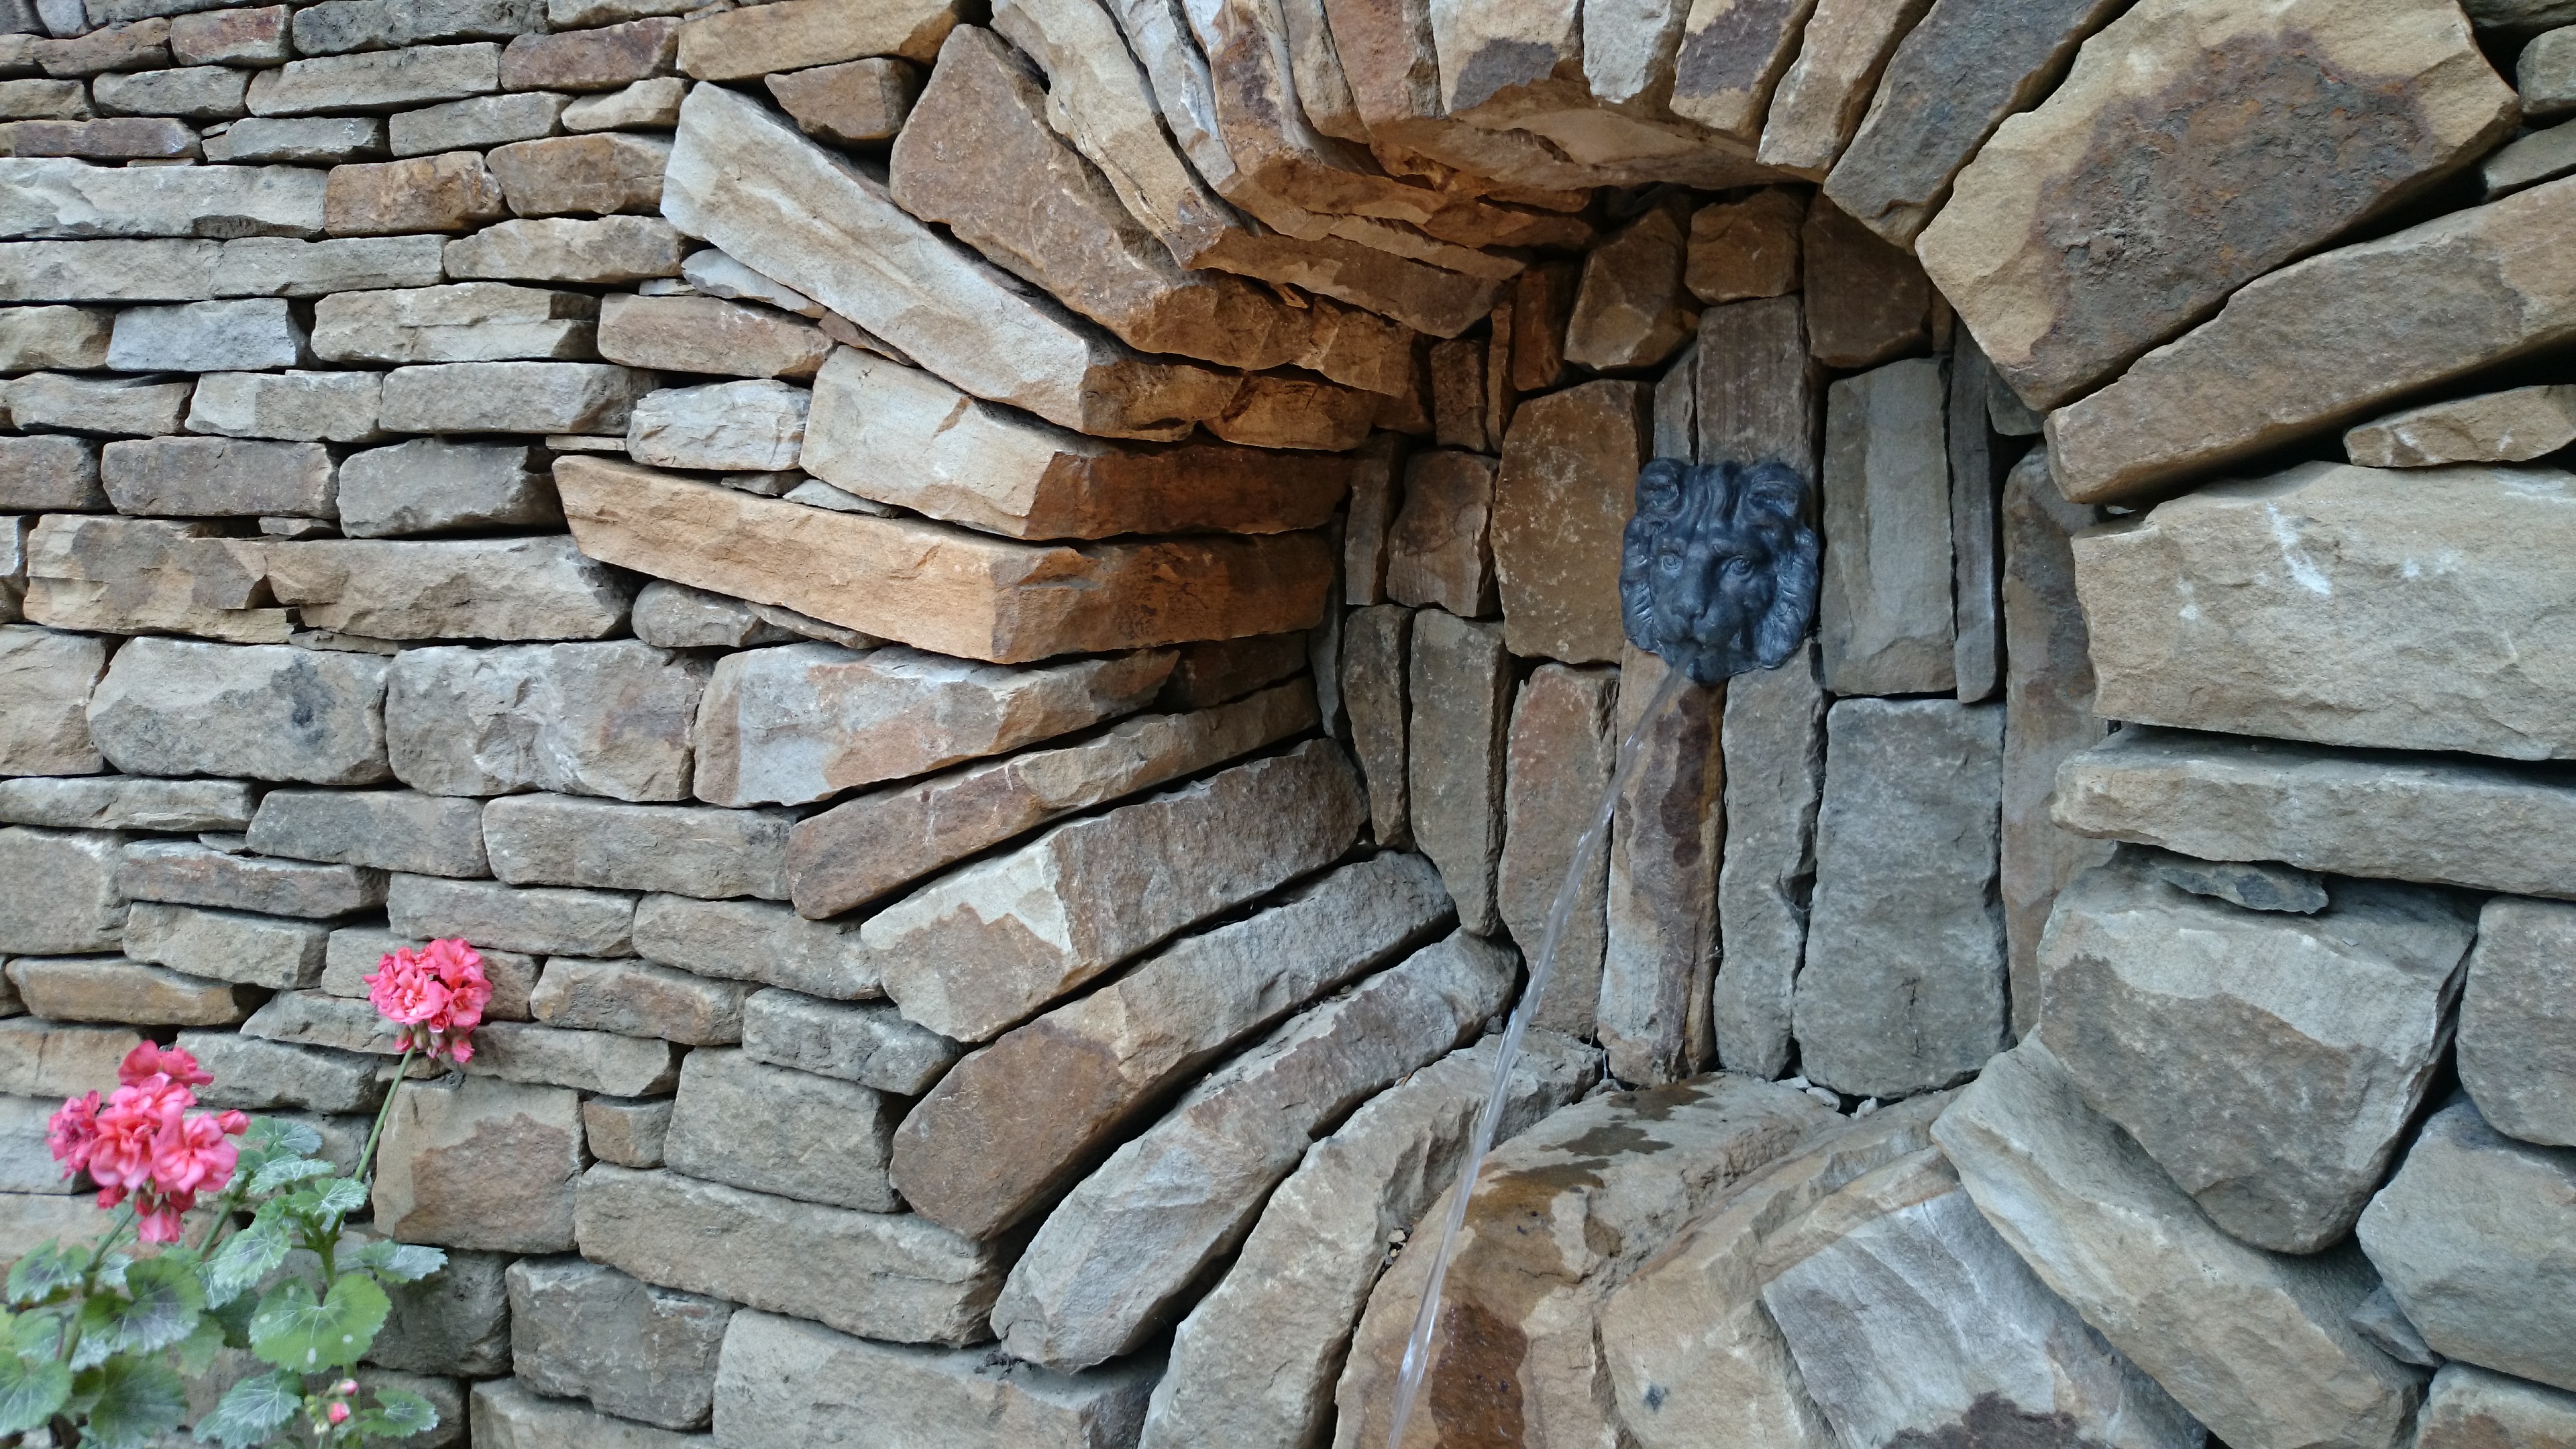 Dry stone moongate and water feature